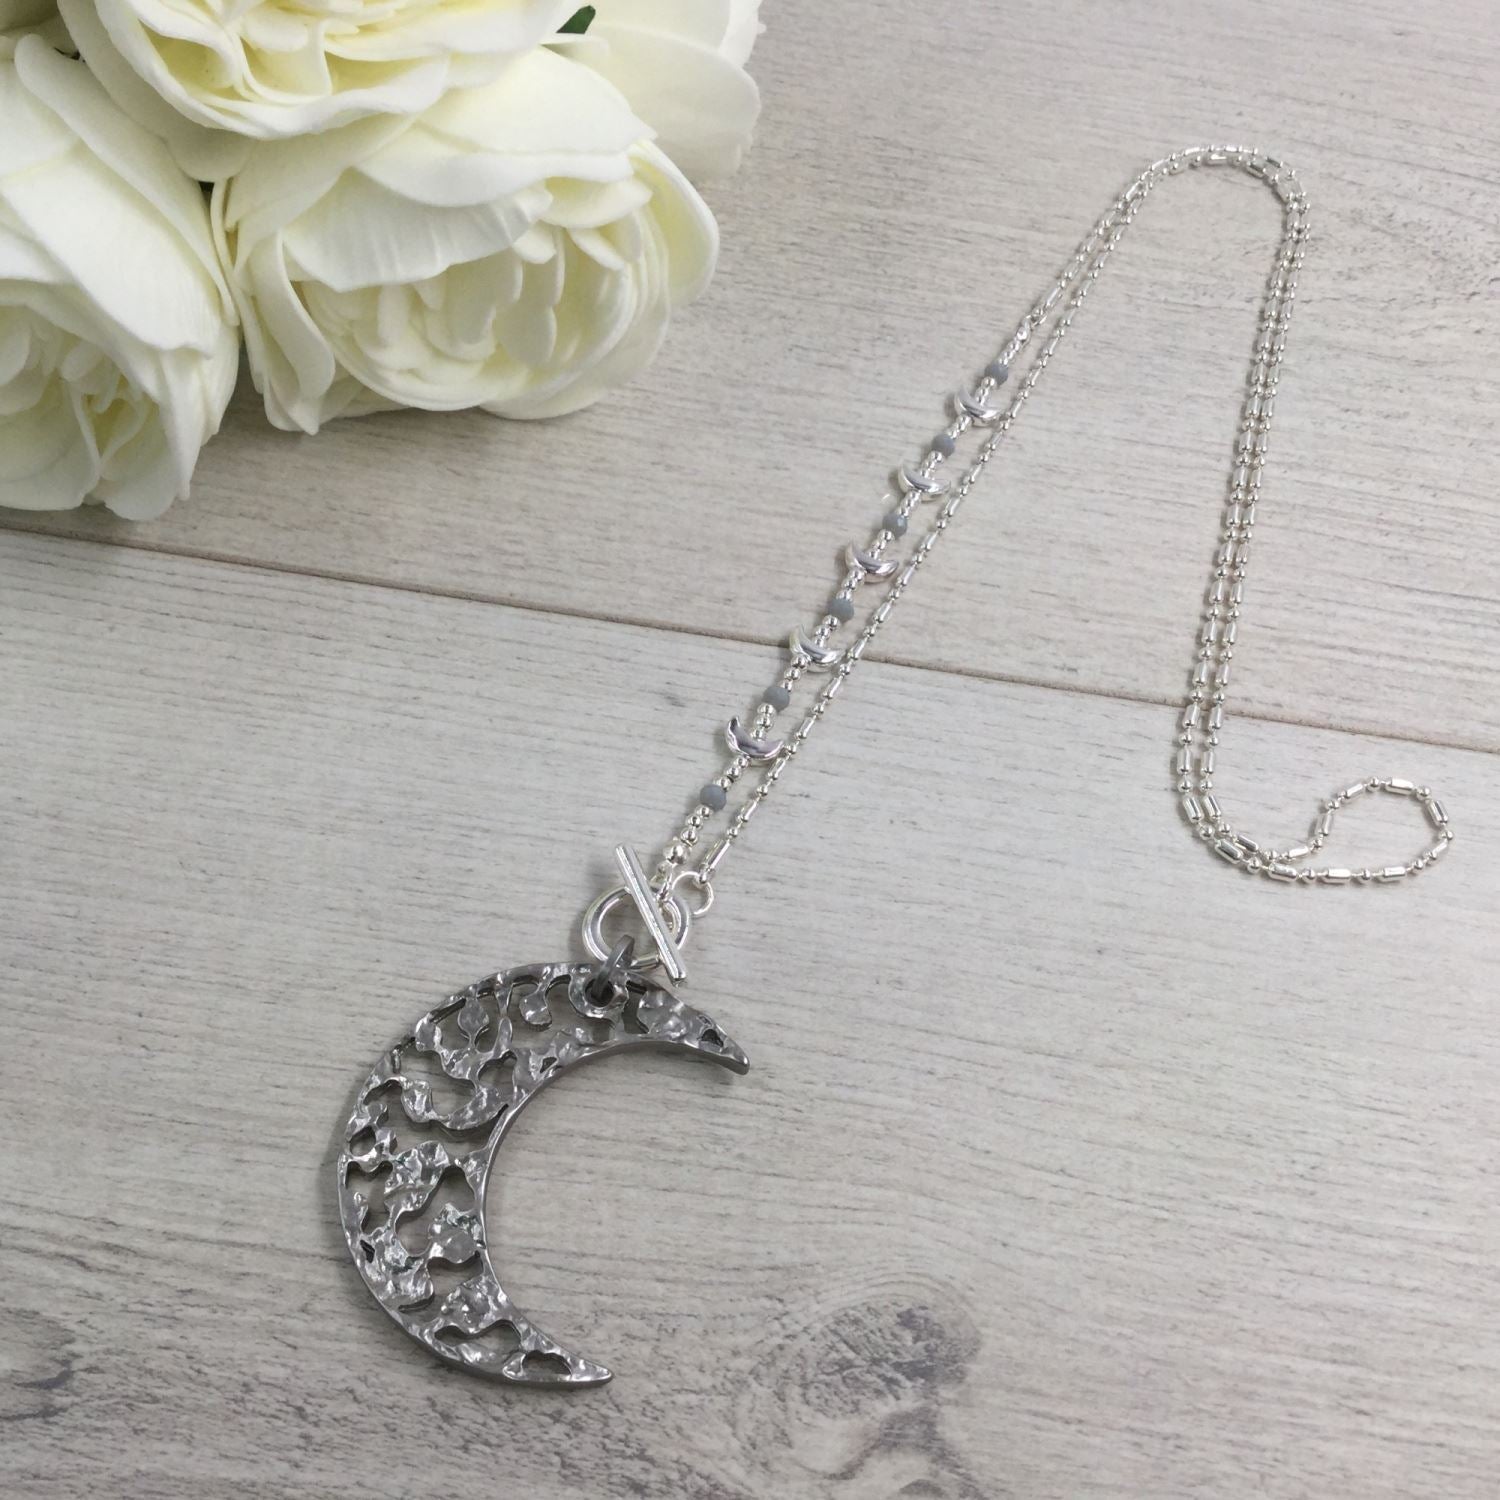 Buy Crescent Moon Necklace, Half Moon With Tiny Star Pendant, Delicate Moon  Necklace, Celestial Necklace Online in India - Etsy